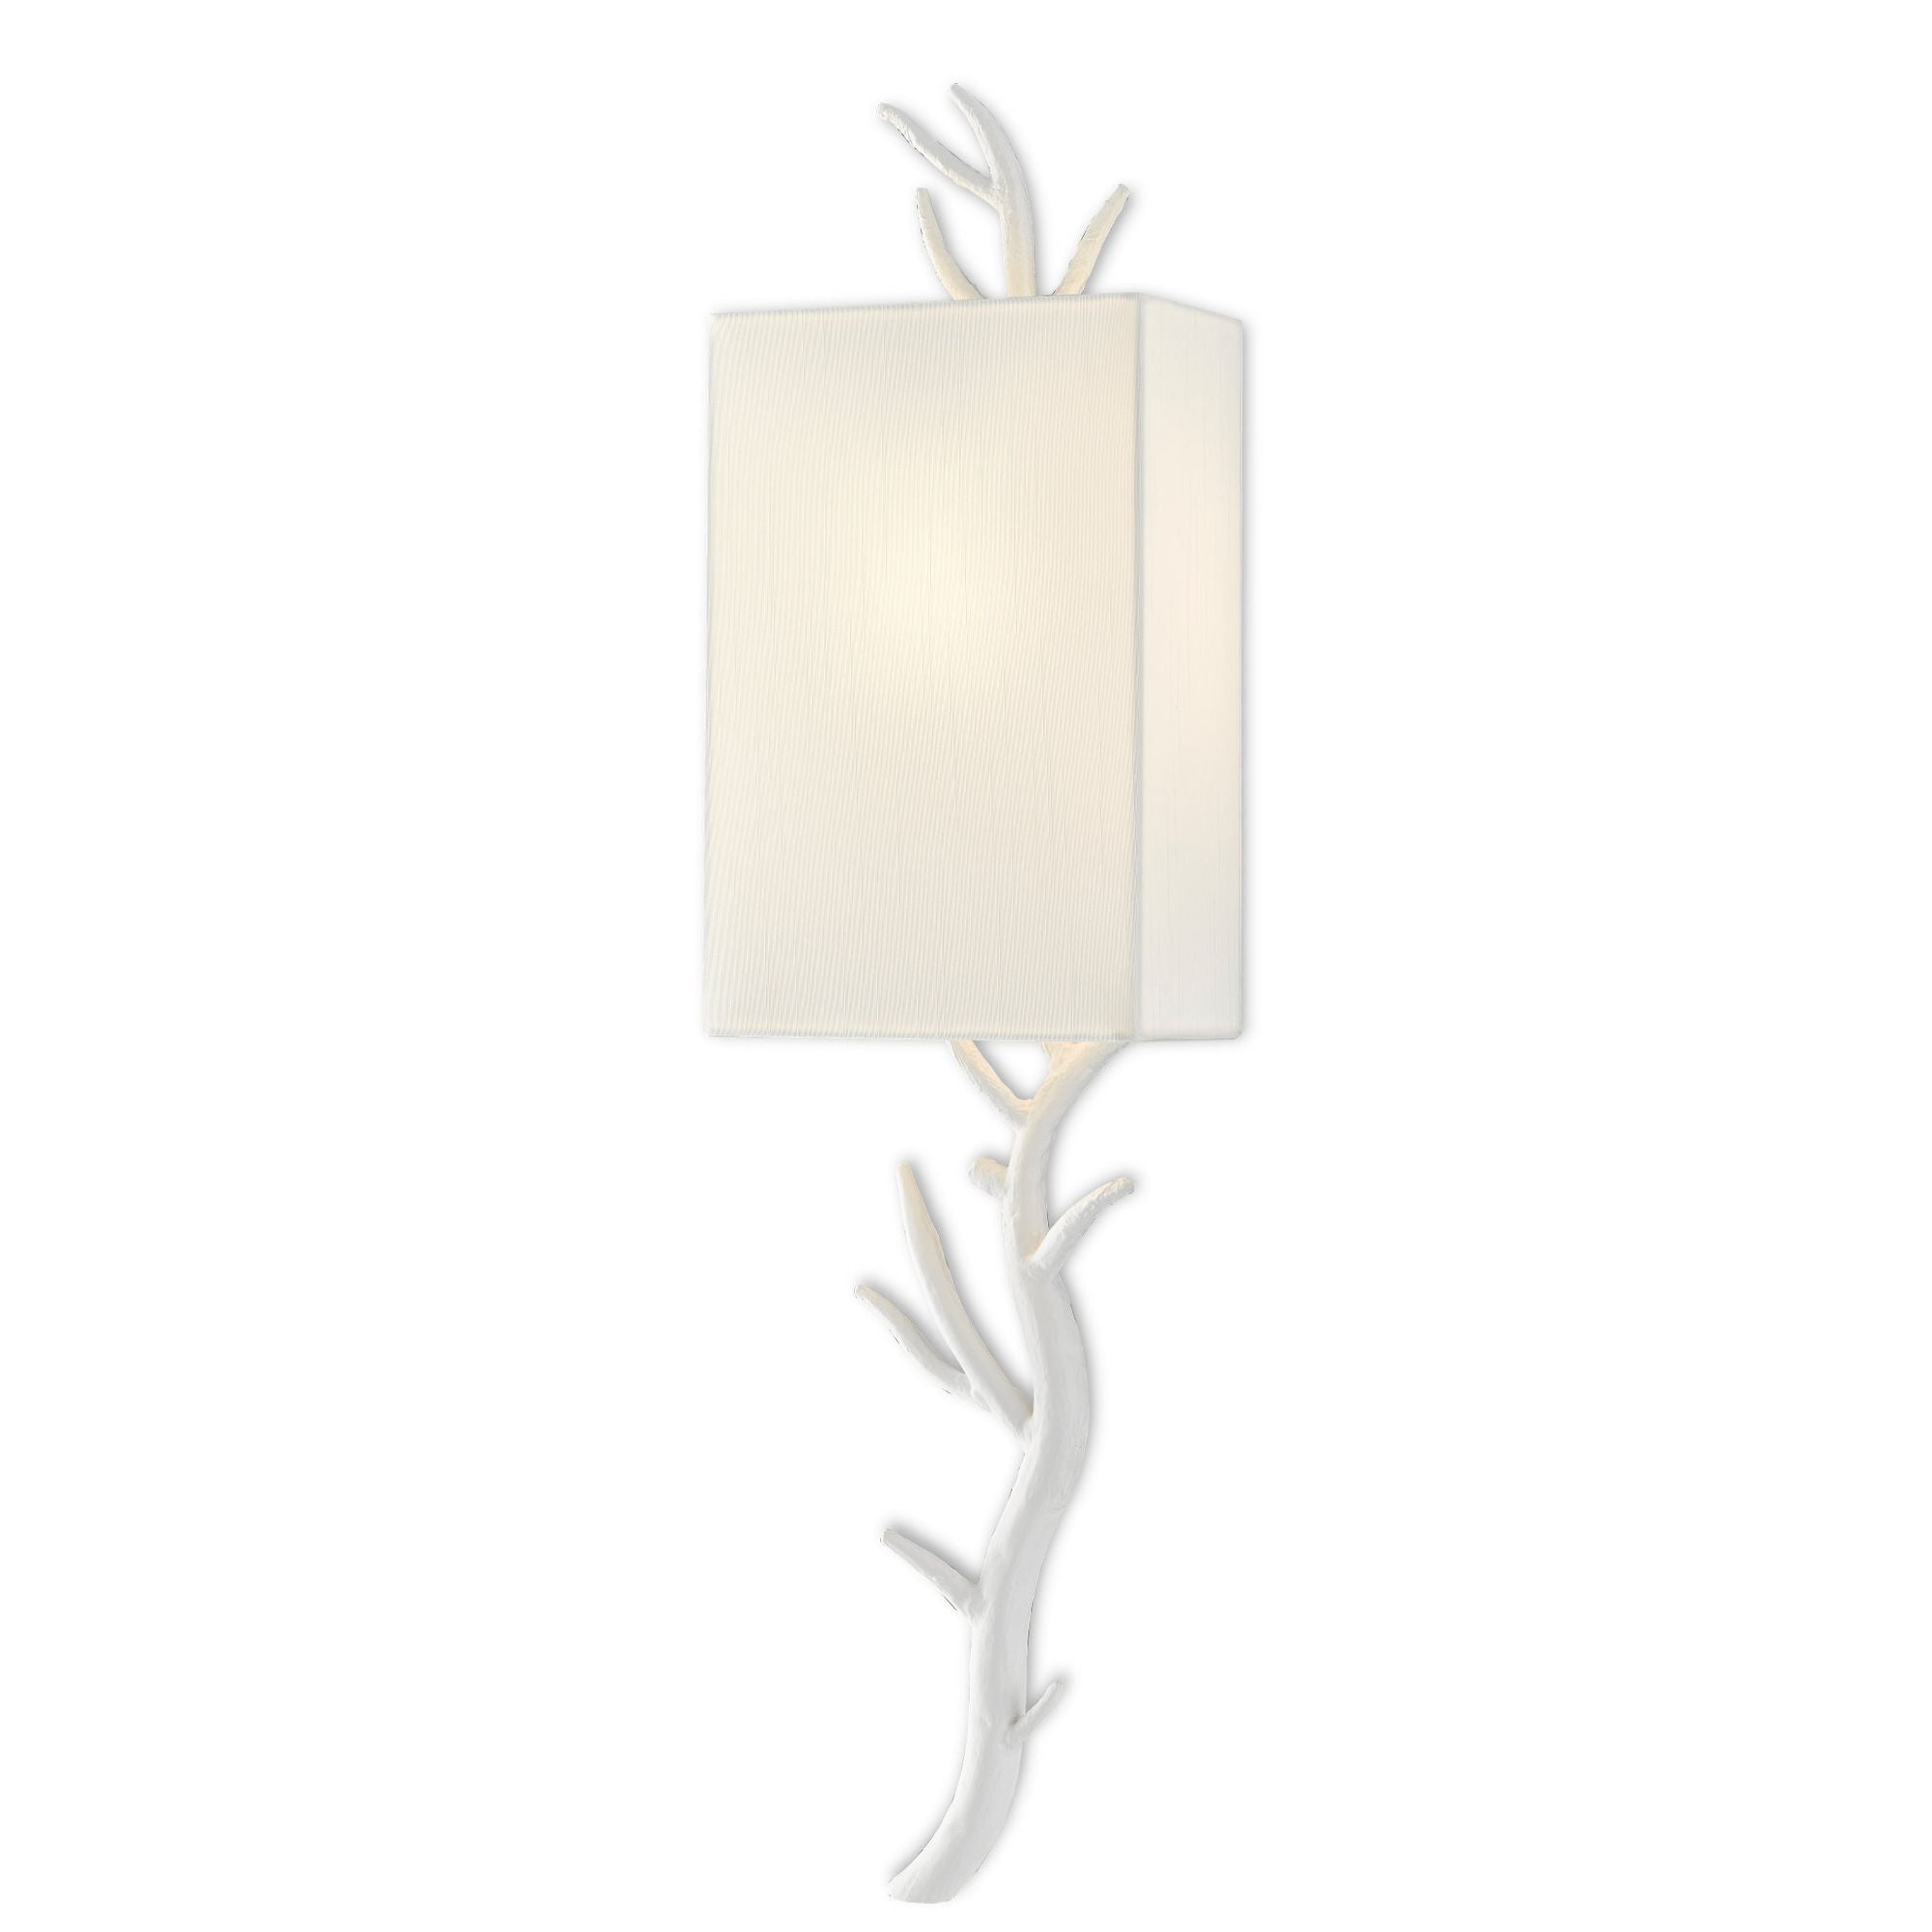 Baneberry White Wall Sconce, White Shade, Left - Gesso White